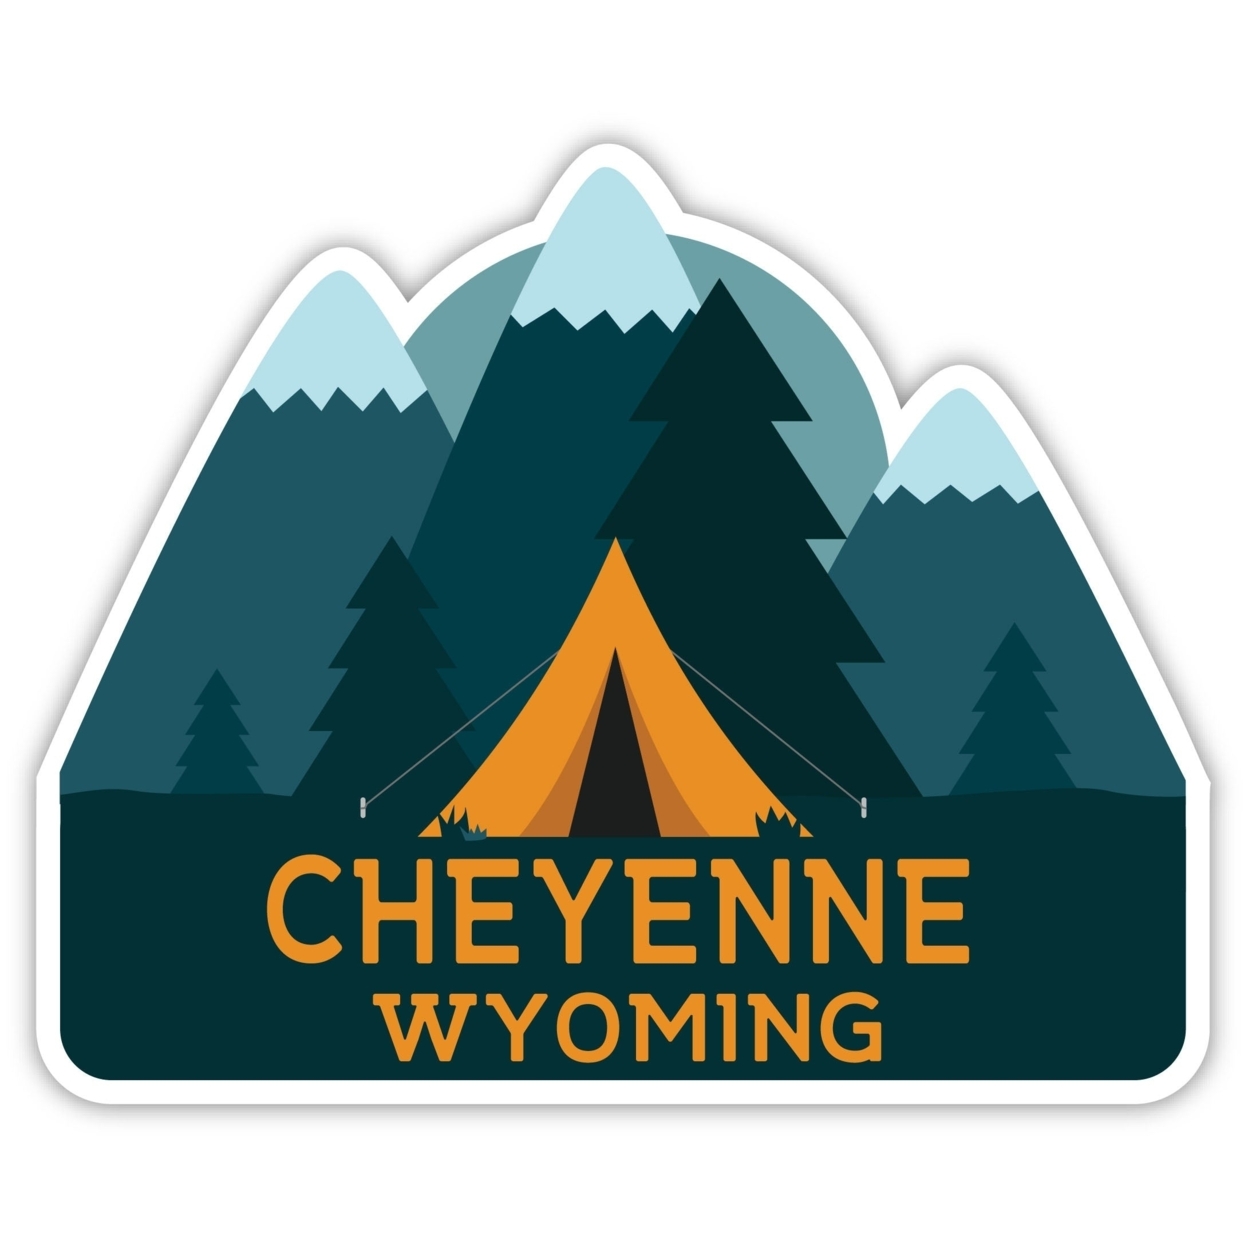 Cheyenne Wyoming Souvenir Decorative Stickers (Choose Theme And Size) - 4-Pack, 12-Inch, Tent